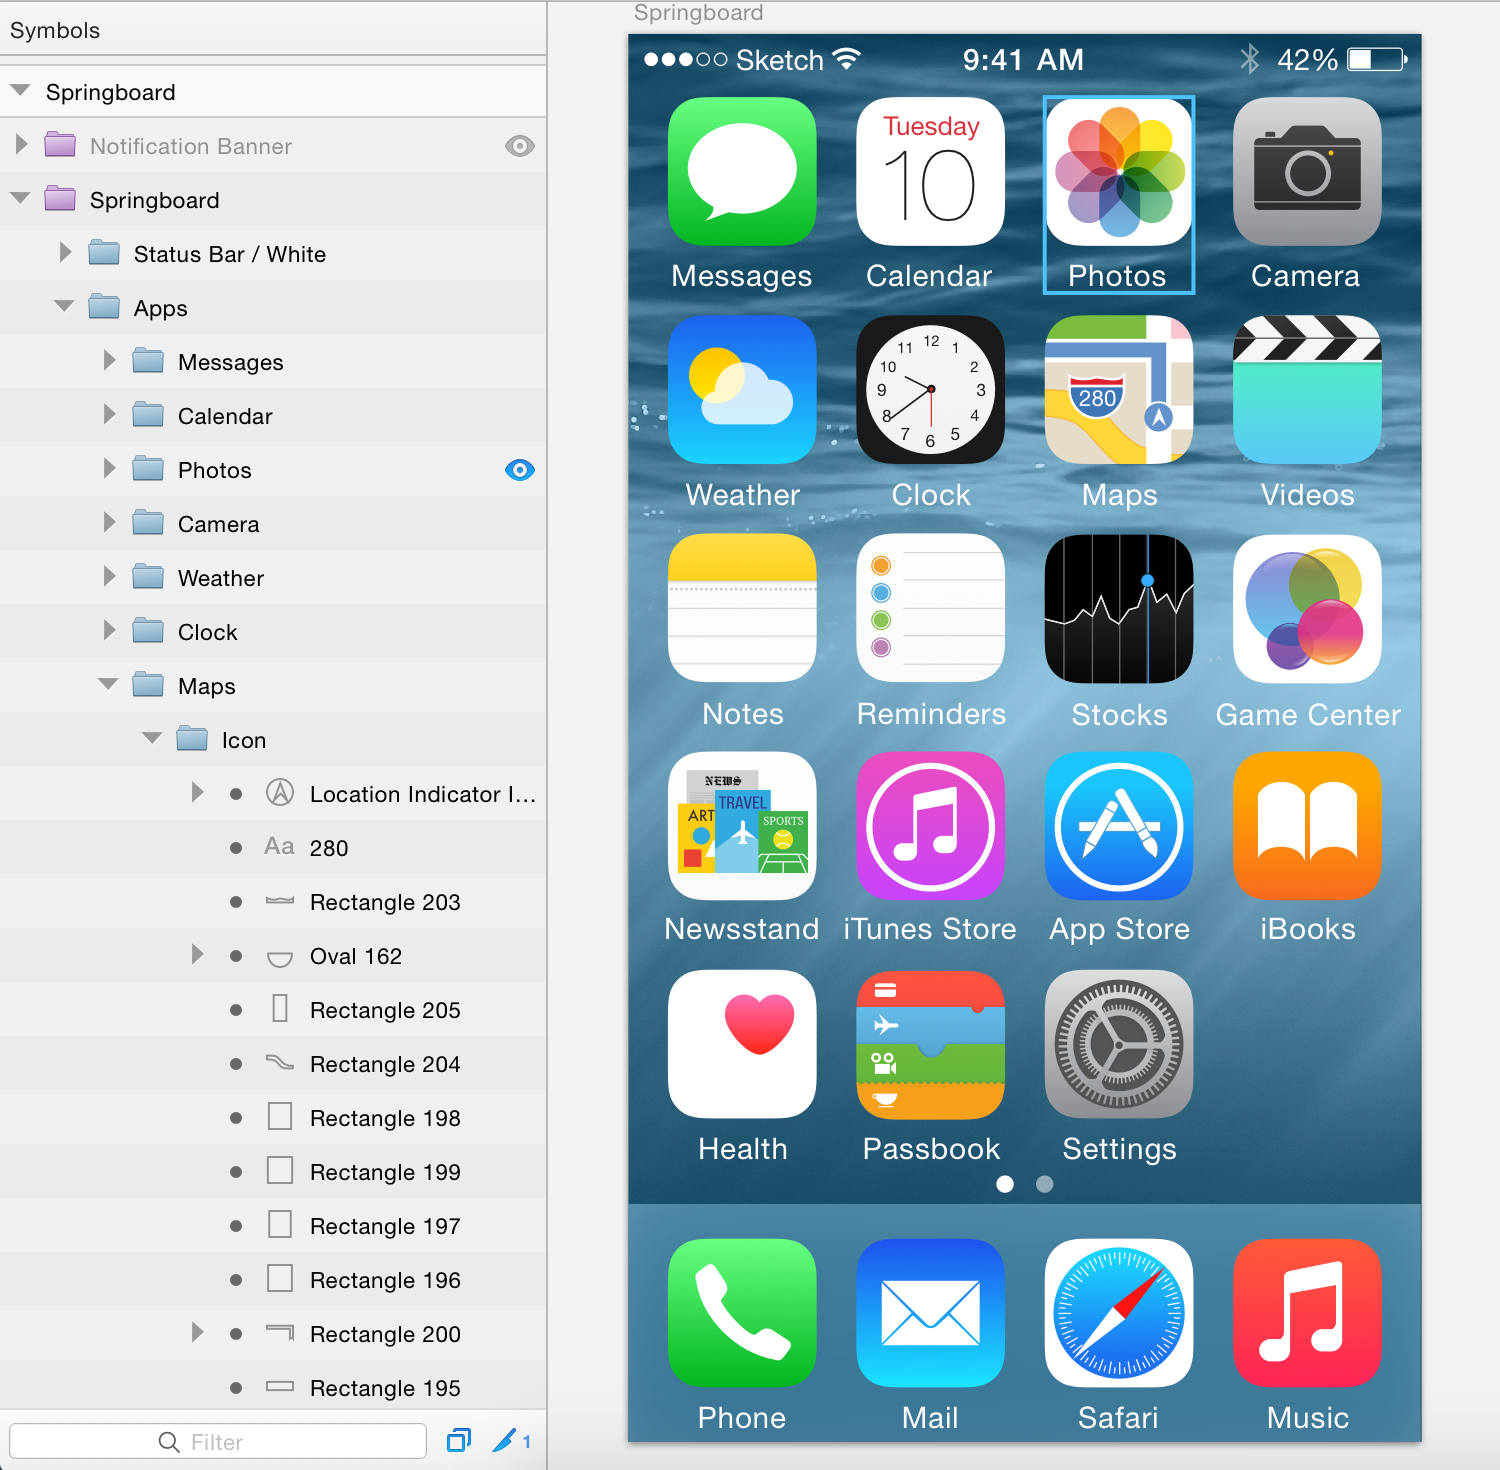  /ios8uikit: And extended and updated to iOS 8 UI Kit for Sketch